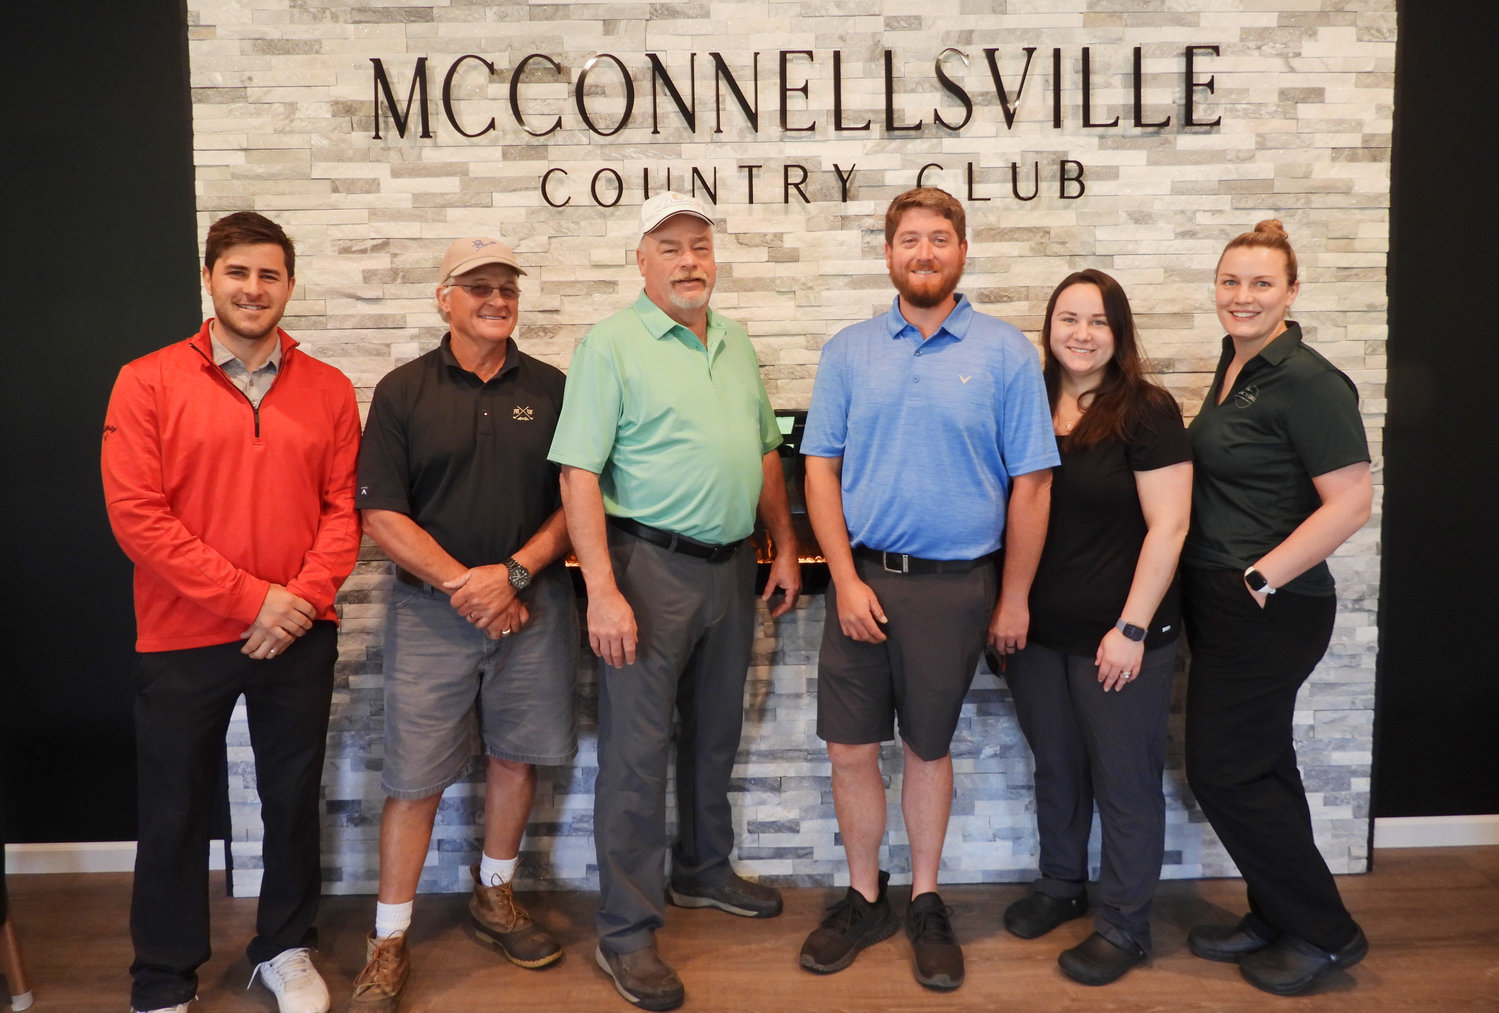 McConnellsville Country Club is under new management and owners Todd and Cindy Bowman are looking to continue the Club’s legacy while bringing positive changes that build on it. Pictured: from left Head Golf Professional Kyle Siegel, Head Superintendent John Shannon, Co-Owner Todd Bowman, Assistant Superintendent Austin Cook, General Manager Jessica Cook, and Sales and Event Manager Katie Bristol